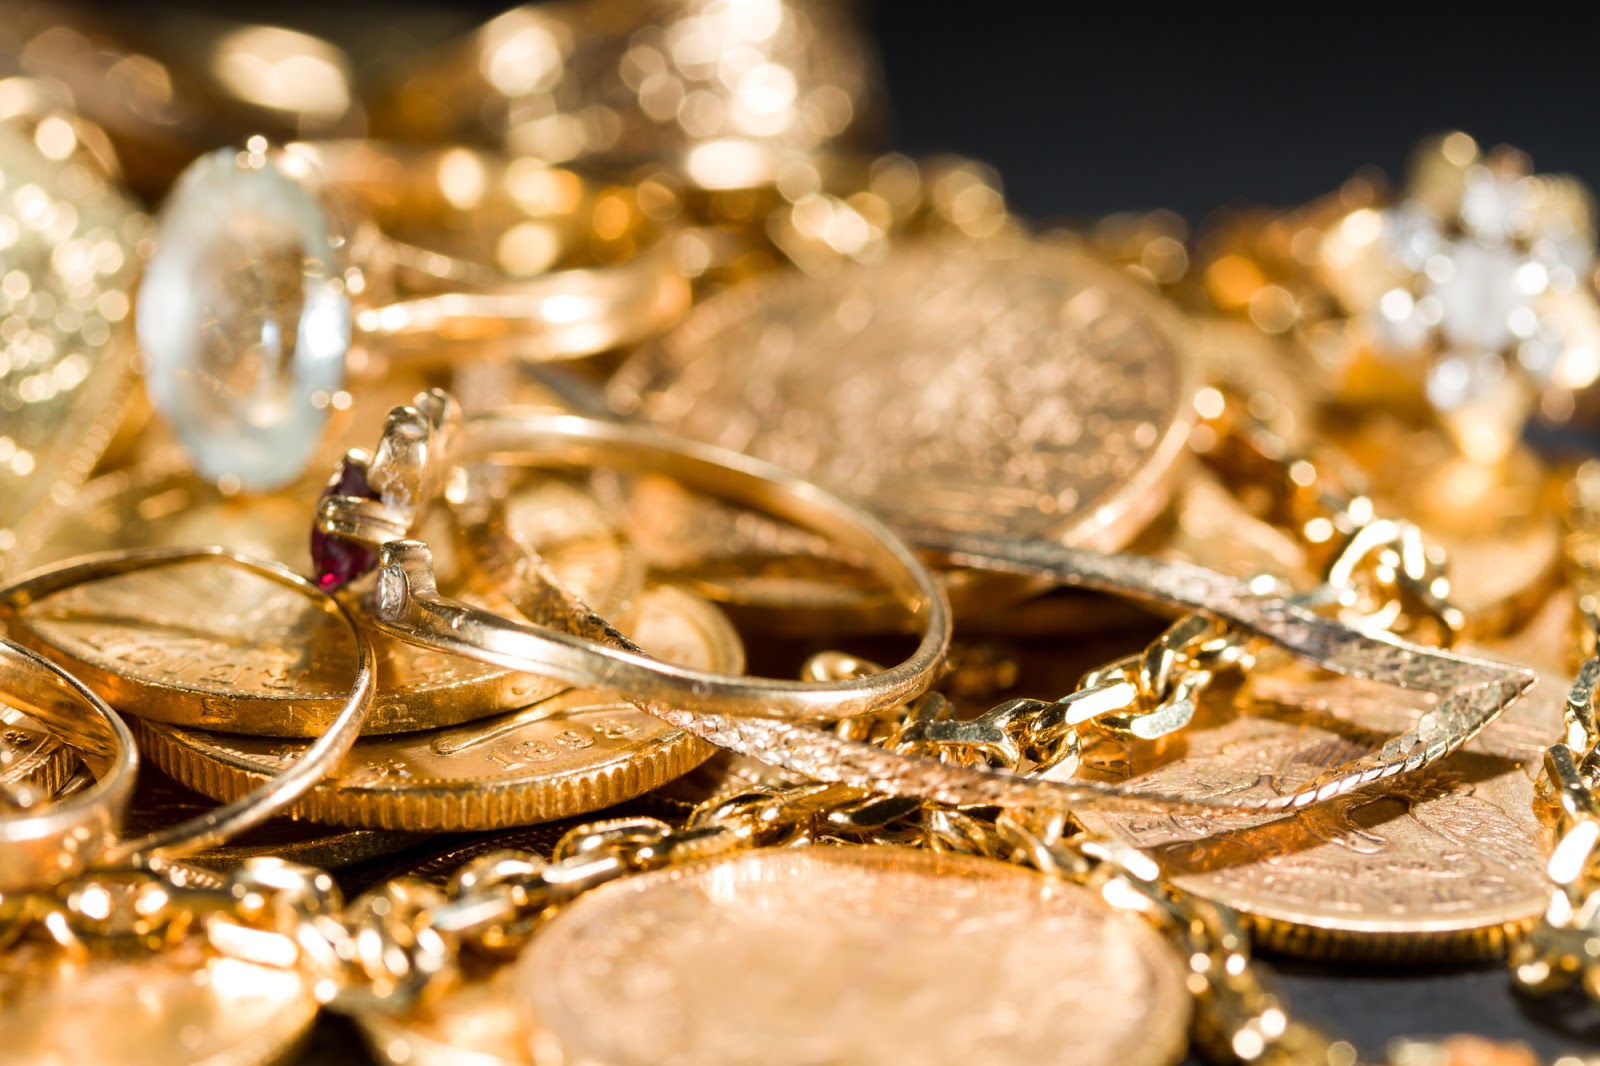 We Buy US Gold Near You - Crown Gold Exchange